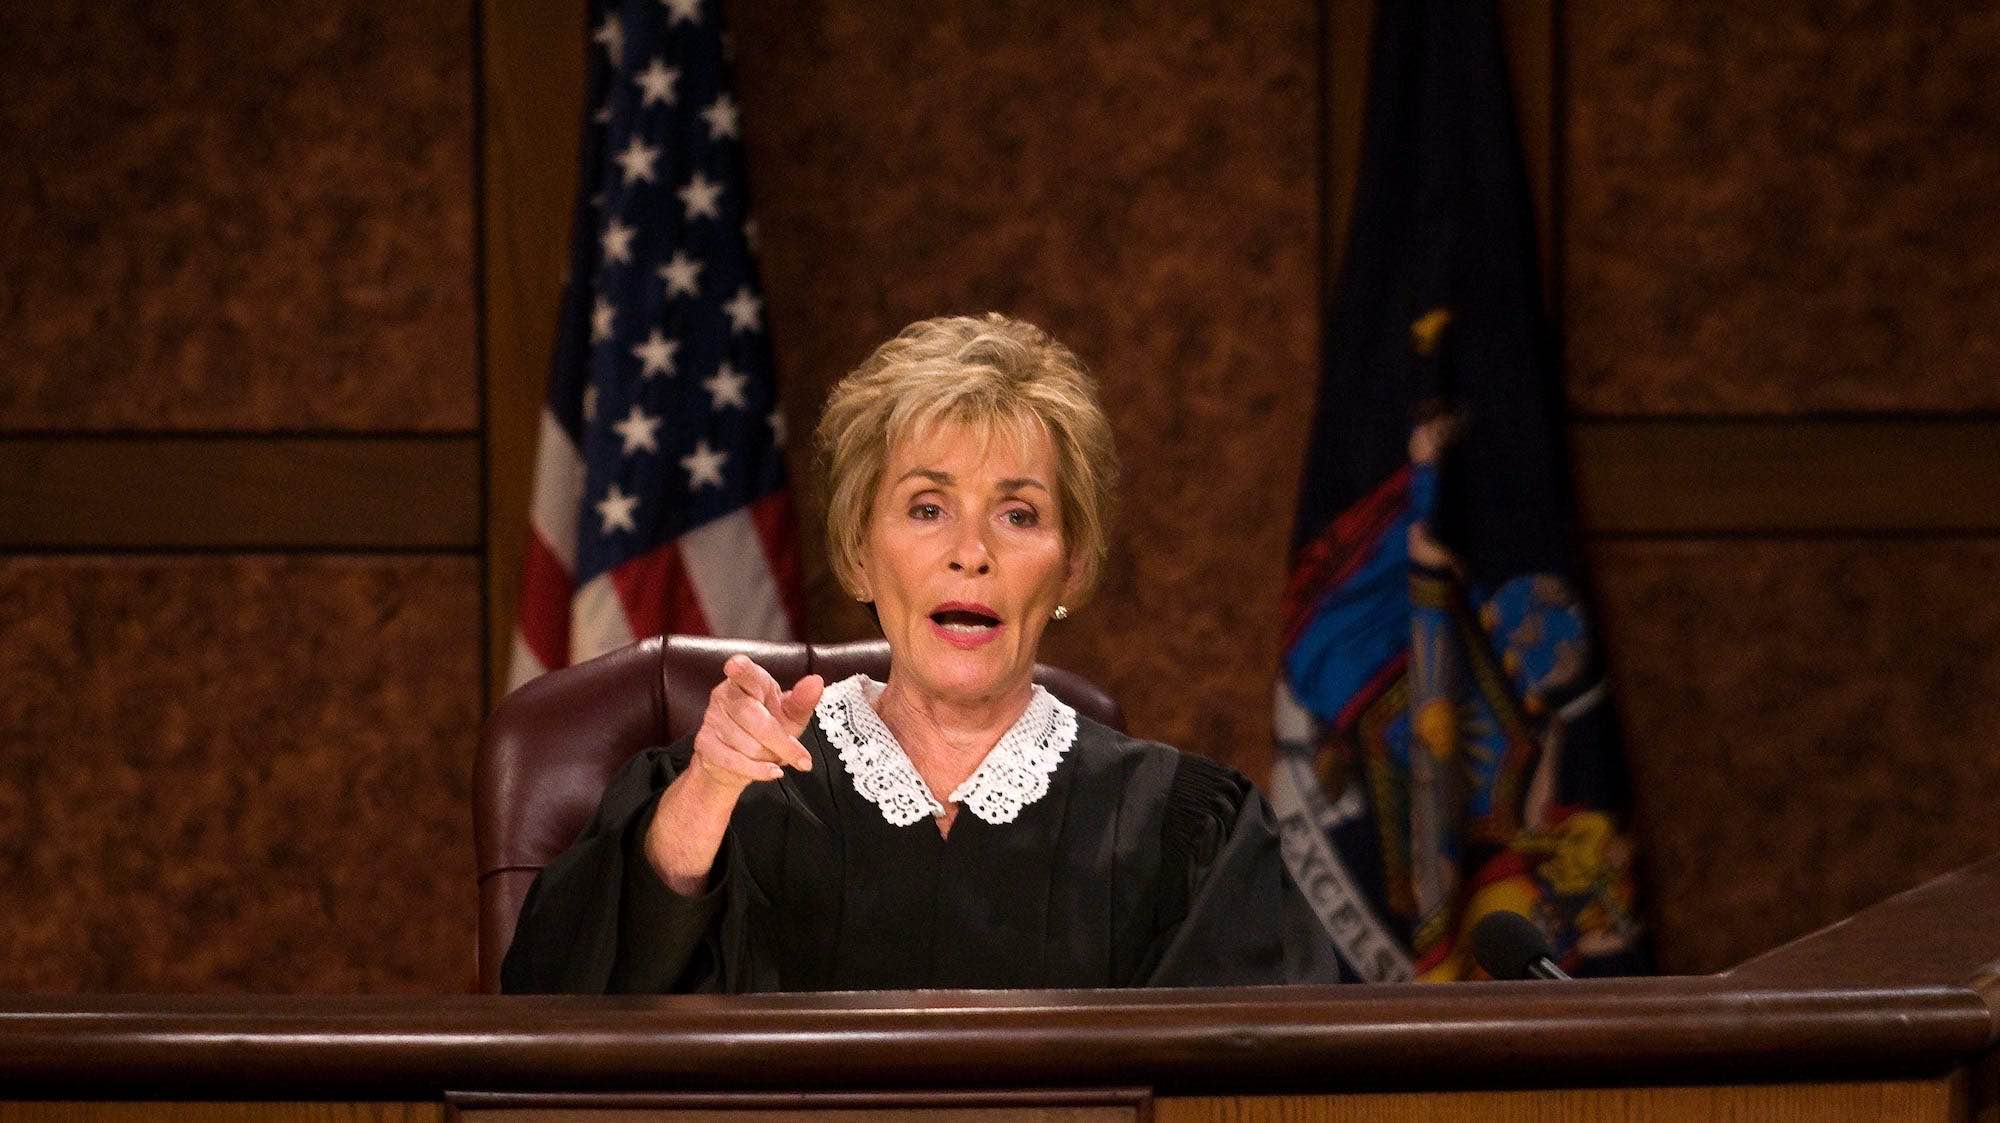 Celebrate Judge Judy's return to TV with these infamous episodes - Fil...